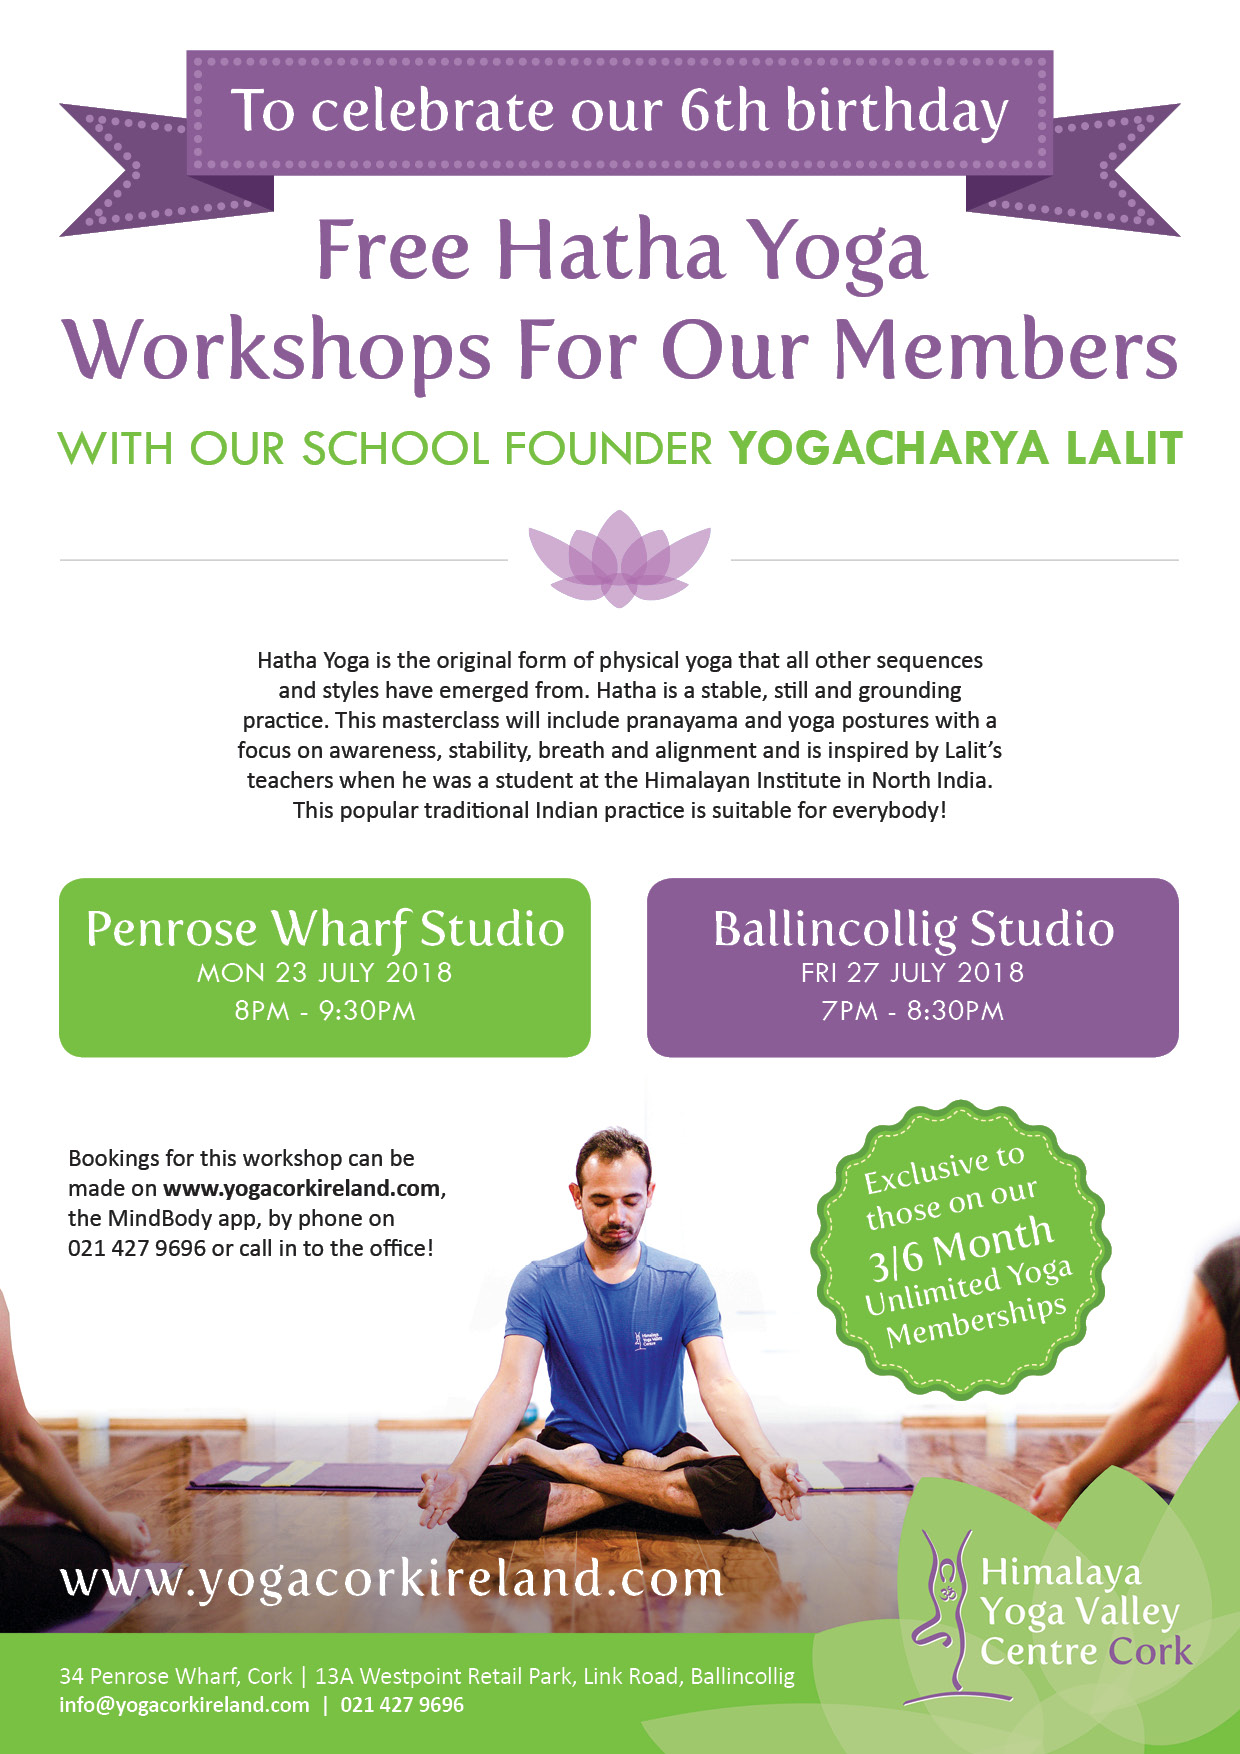 Free Hatha Yoga Workshops For Our Members - Himalaya Yoga Valley